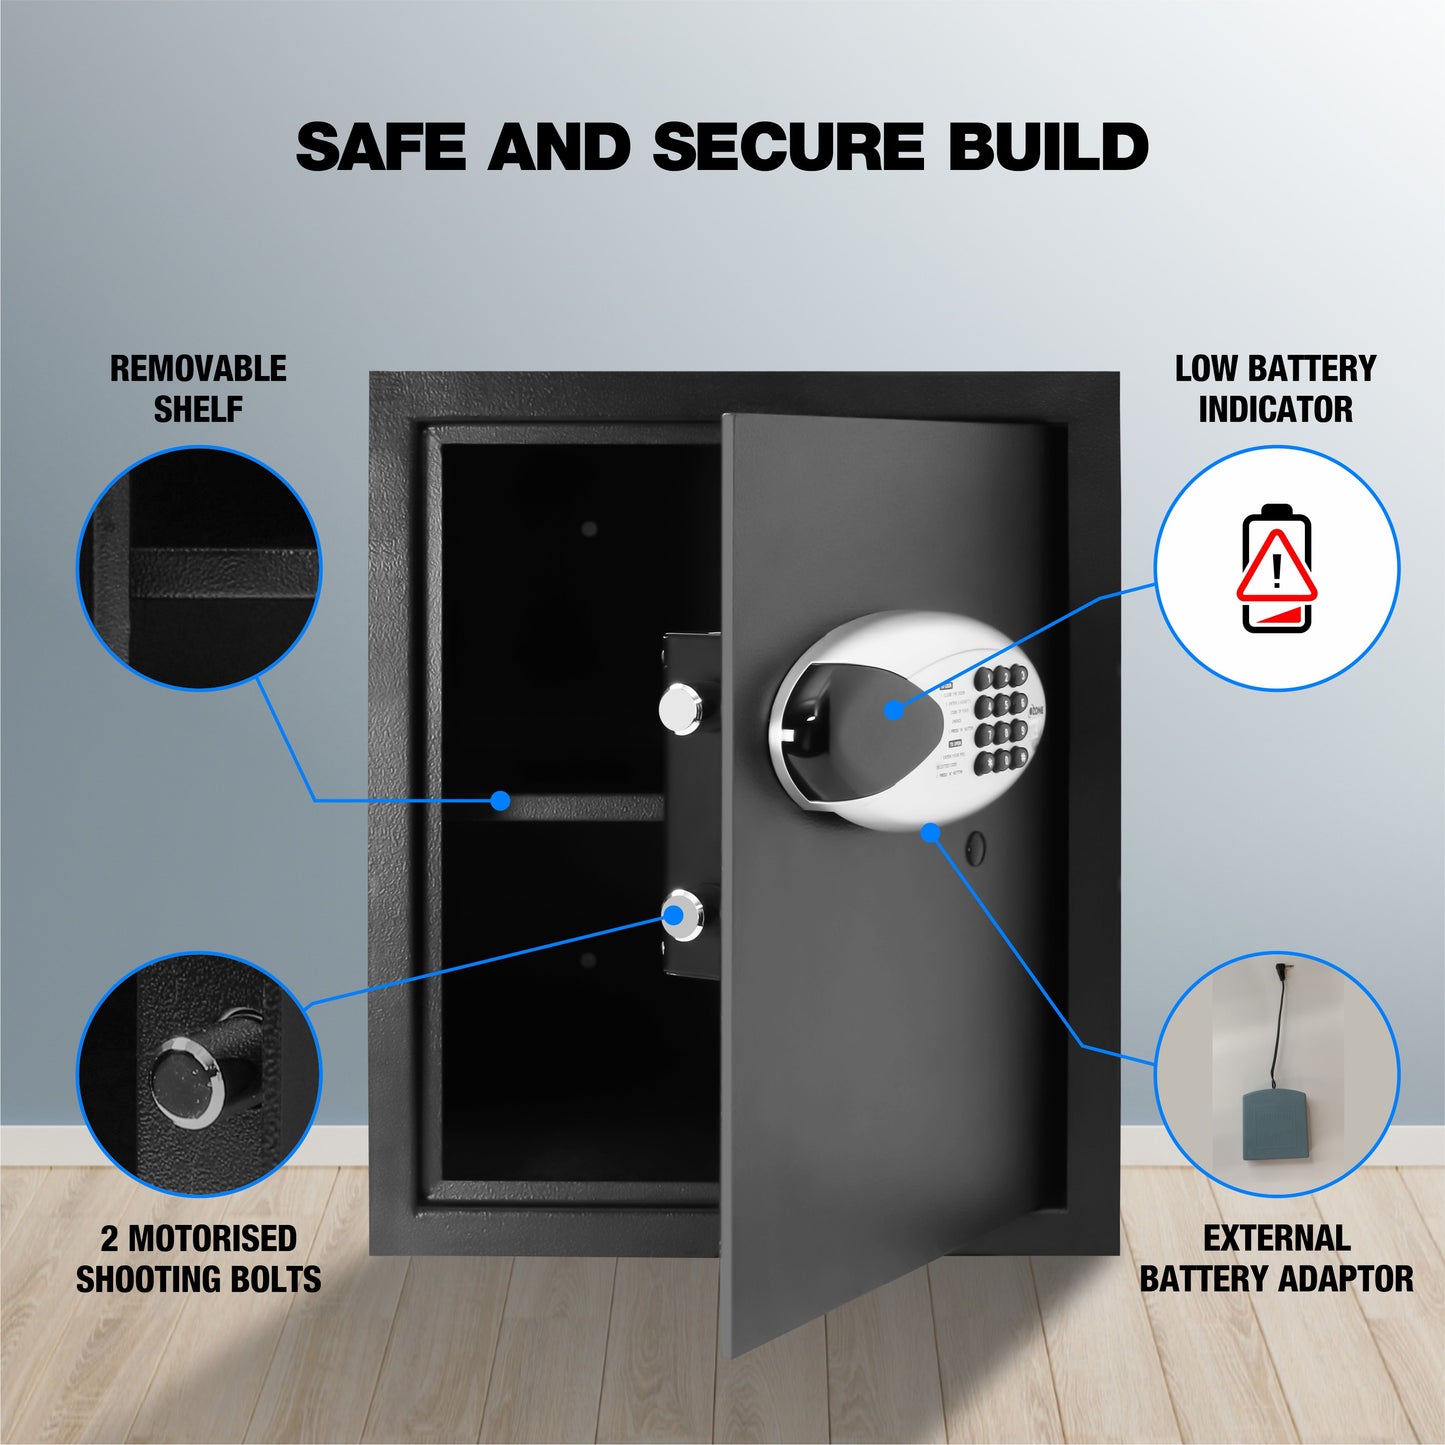 Ozone Digital Safe for Homes & Offices | 2-way Access | Password & Emergency Key (40 Ltrs.)